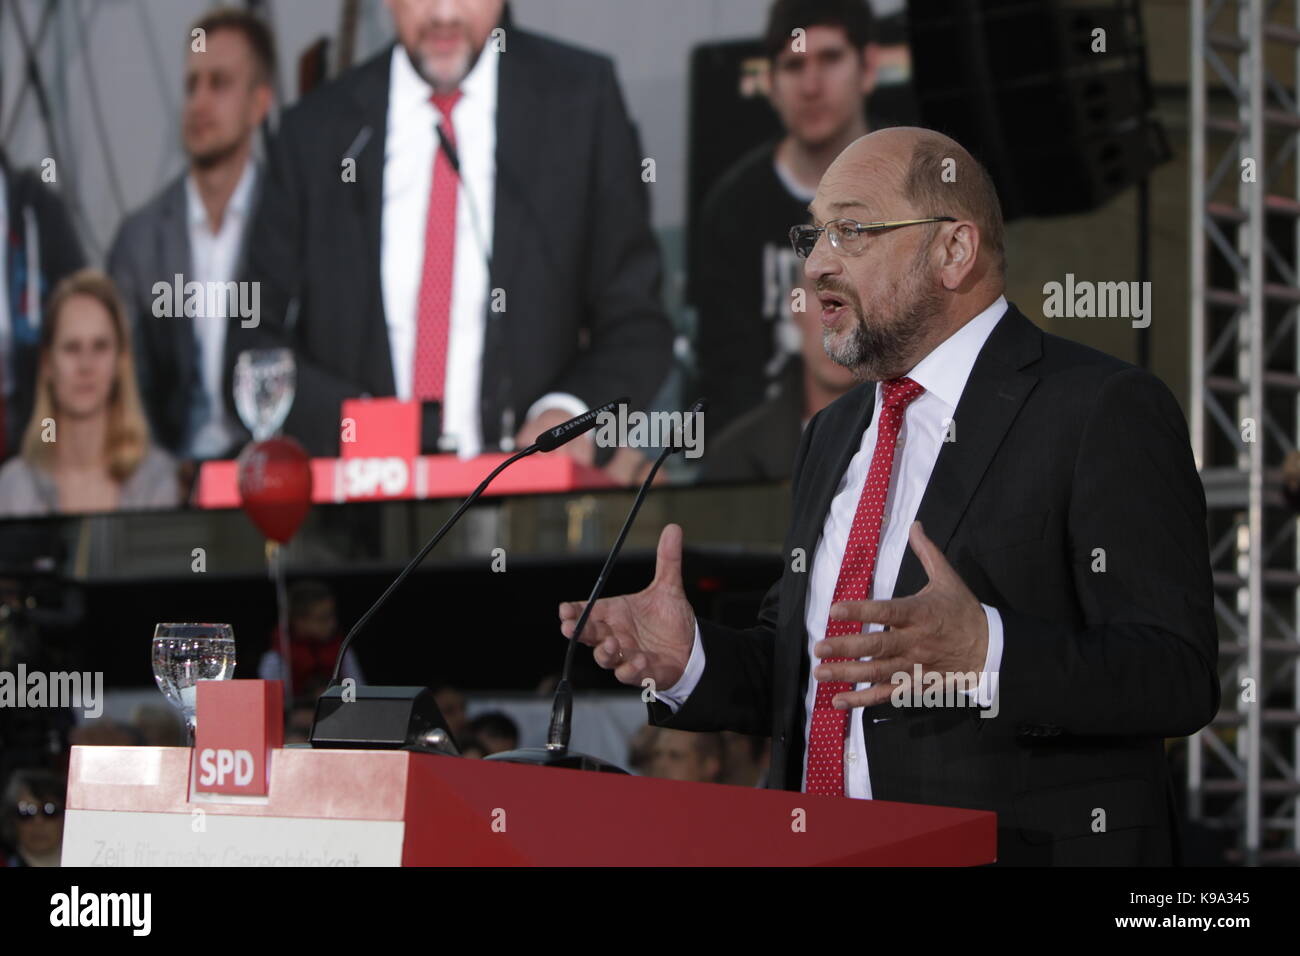 Berlin, Germany. 22nd September 2017. Martin Schulz addresses the rally. The candidate for the German Chancellorship of the SPD (Social Democratic Party of Germany) was the main speaker at a large rally in the centre of Berlin, two days ahead of the German General Election. Stock Photo